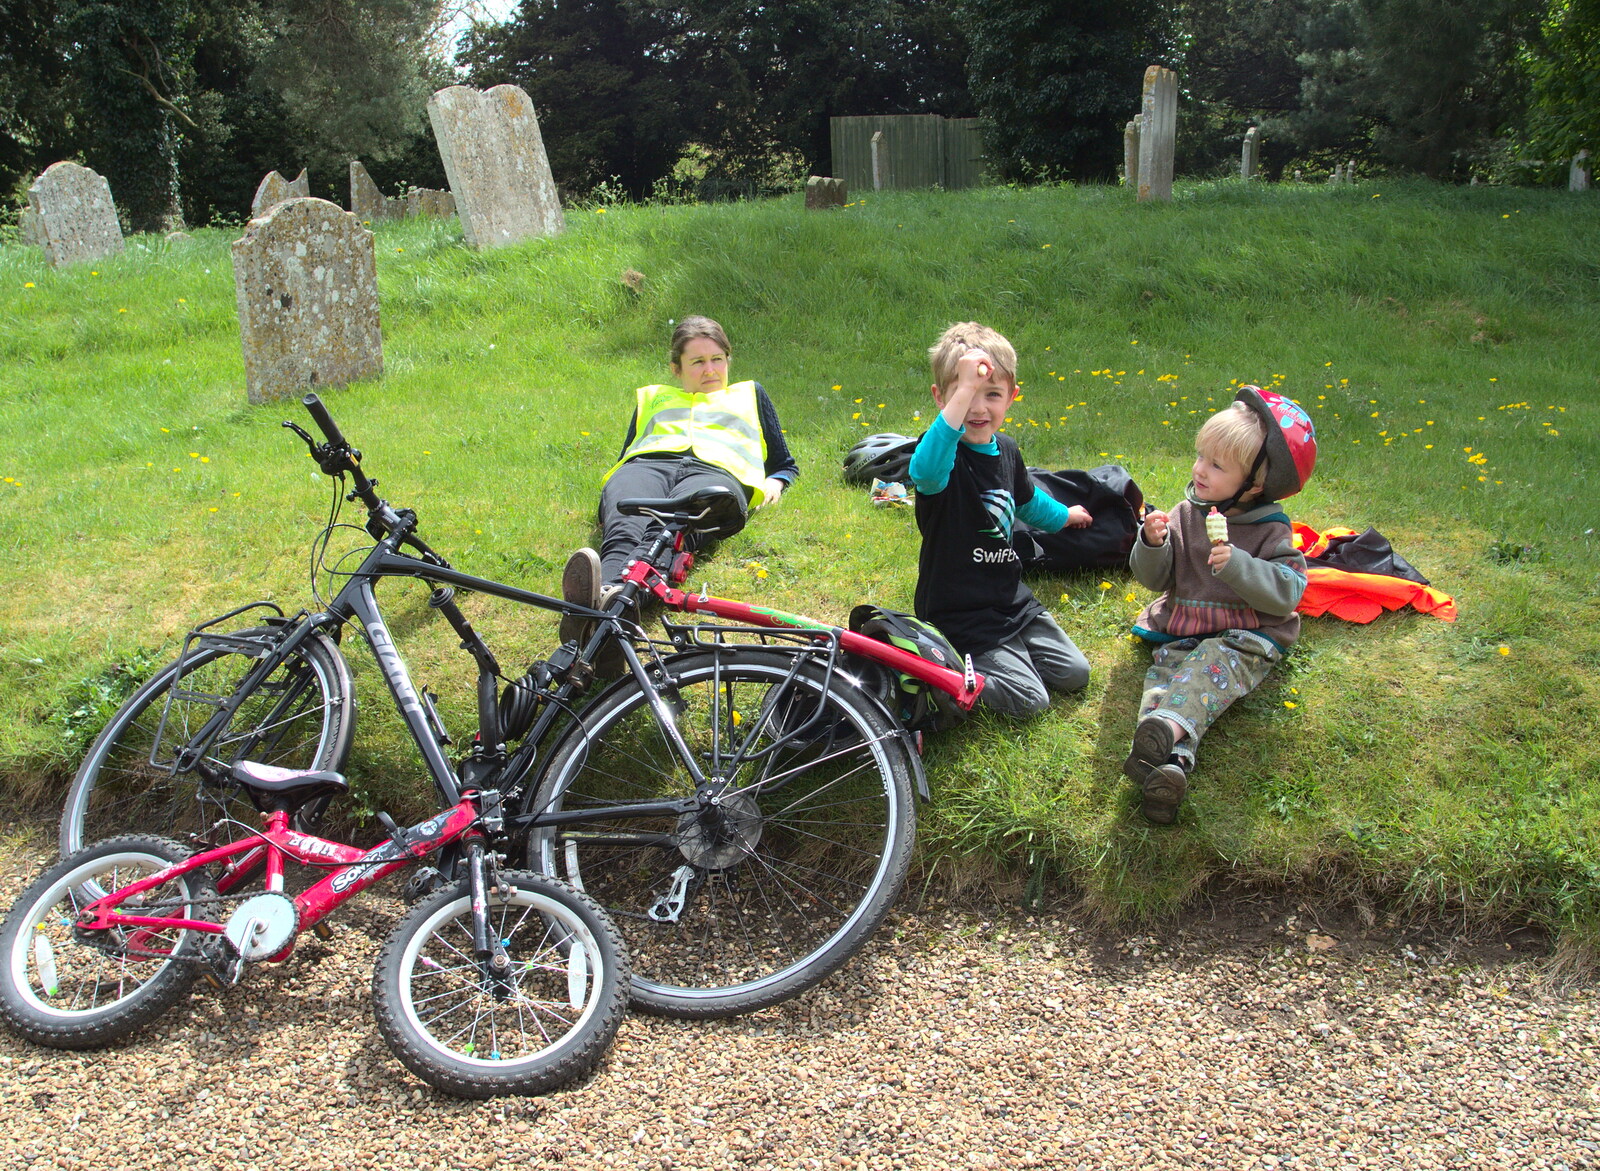 We cycle up to the church in Eye from The Oaksmere's First Year Anniversary, Brome, Suffolk - 23rd April 2015